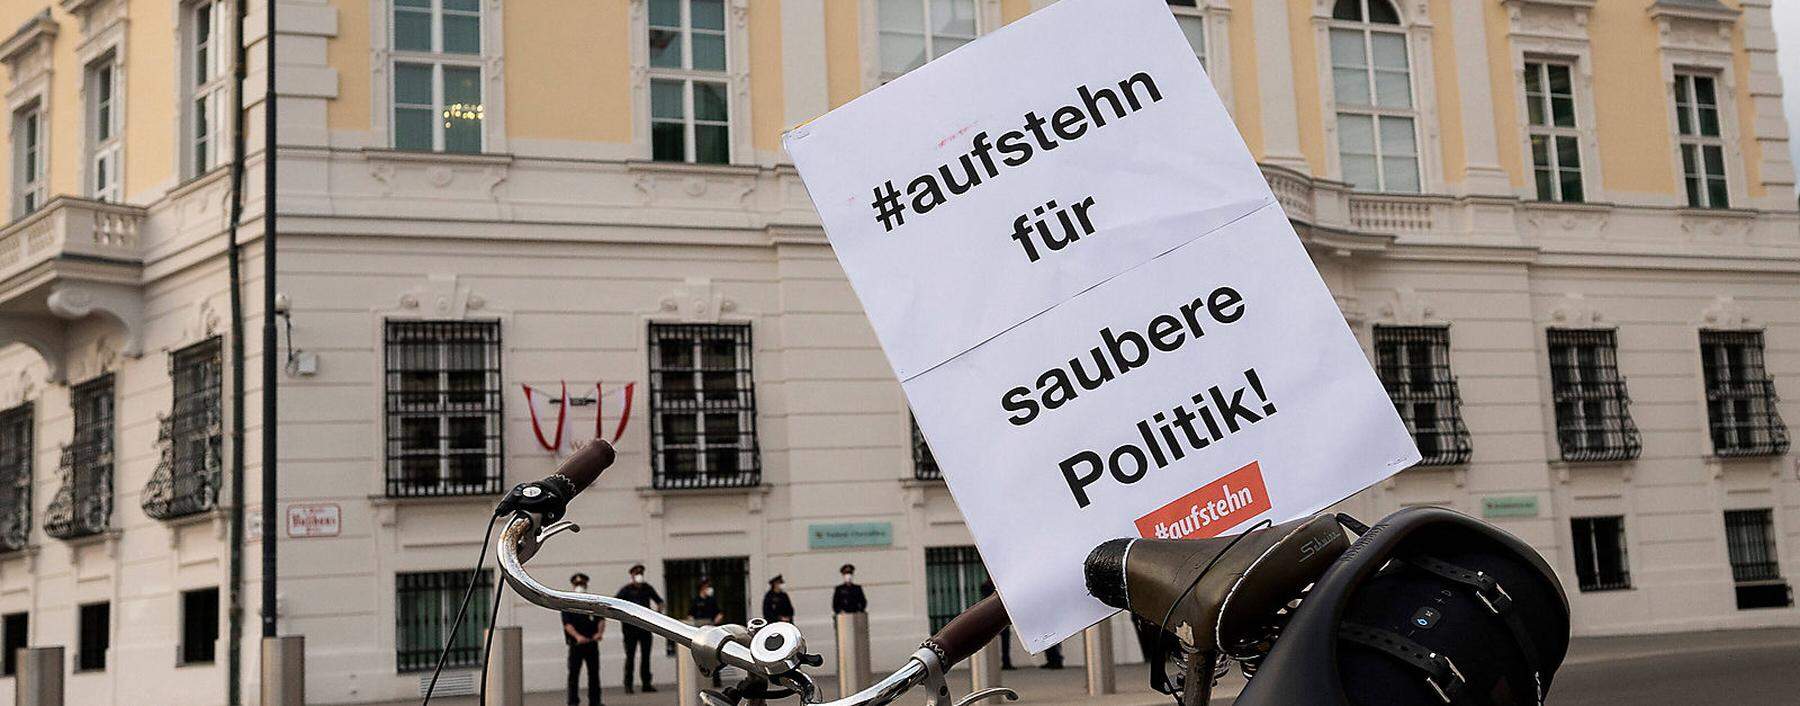 20210401 Flashmob - Easter cleaning for cleaner politics at the Federal Chancellery VIENNA, AUSTRIA - APRIL 1: Flashmob